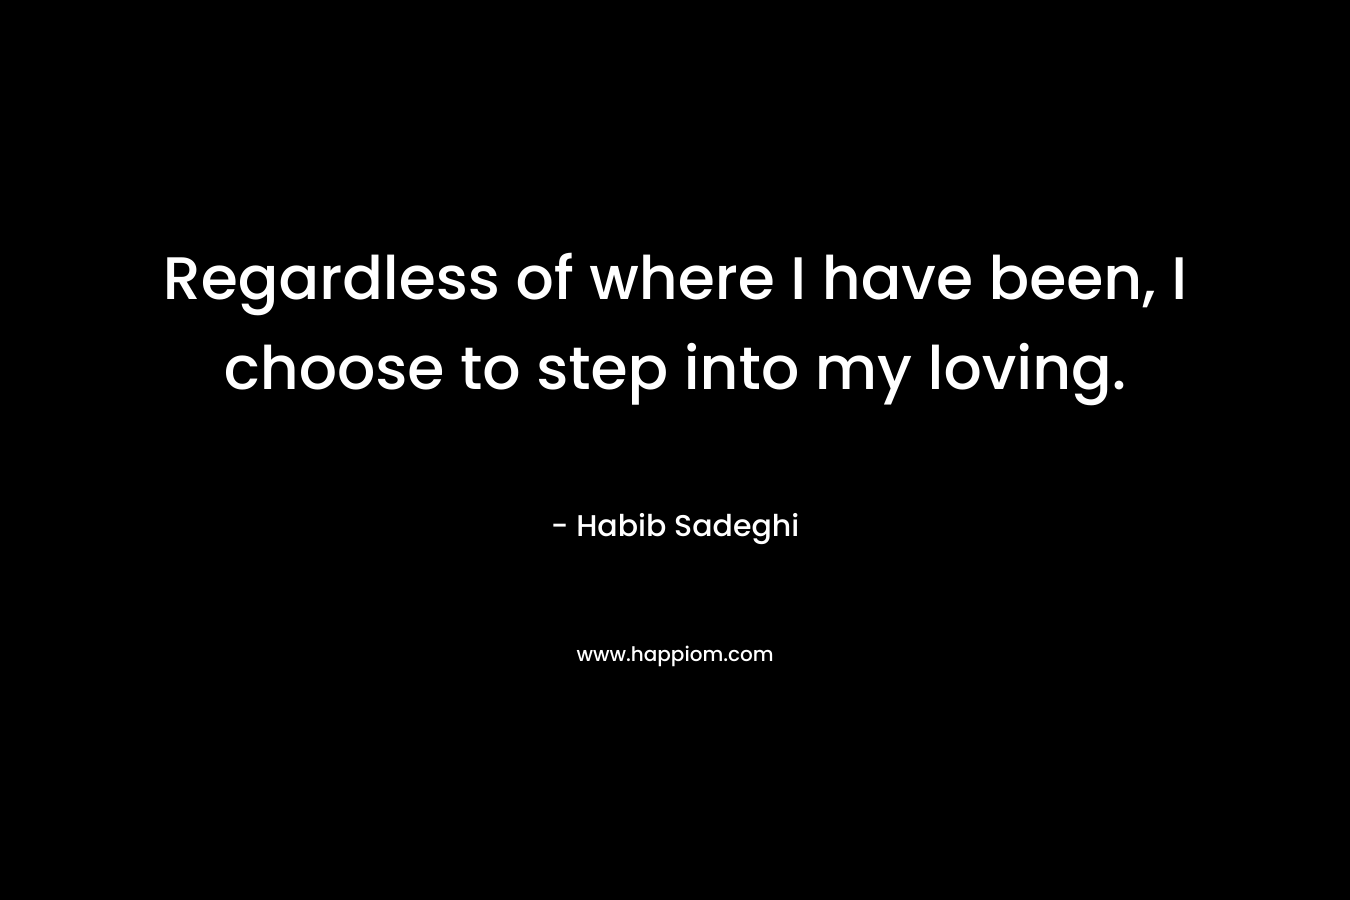 Regardless of where I have been, I choose to step into my loving.